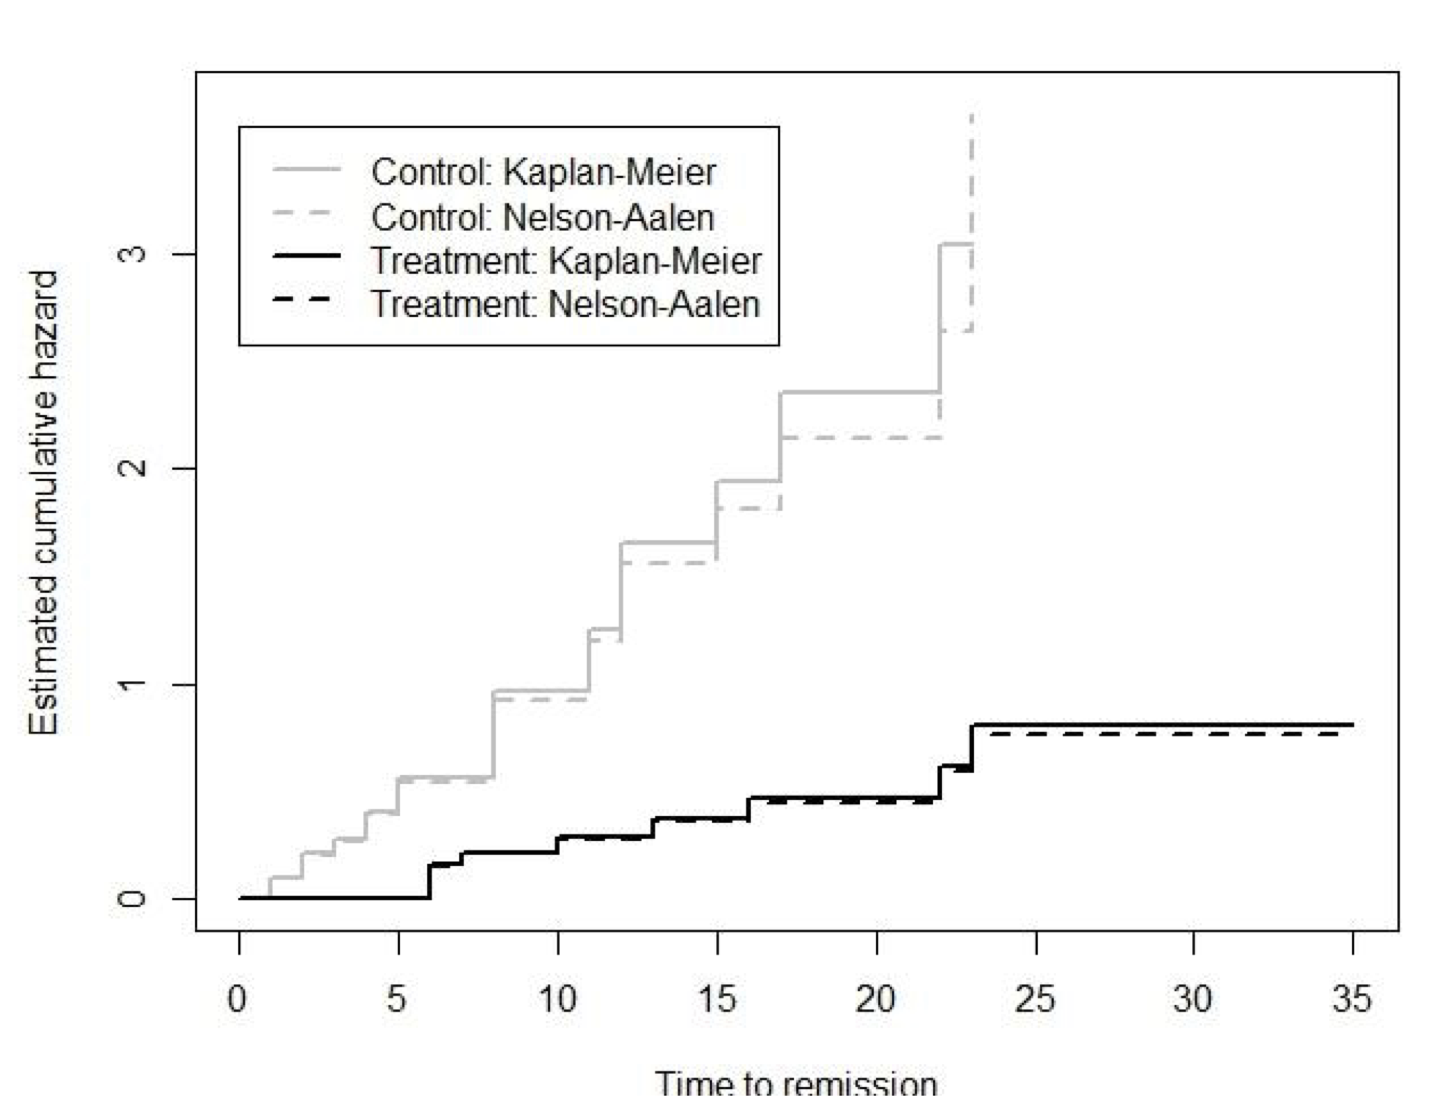 Leukaemia patient data: comparing Kaplan-Meier and Nelson-Aalen estimates of the cumulative hazard in the treatment and control groups.